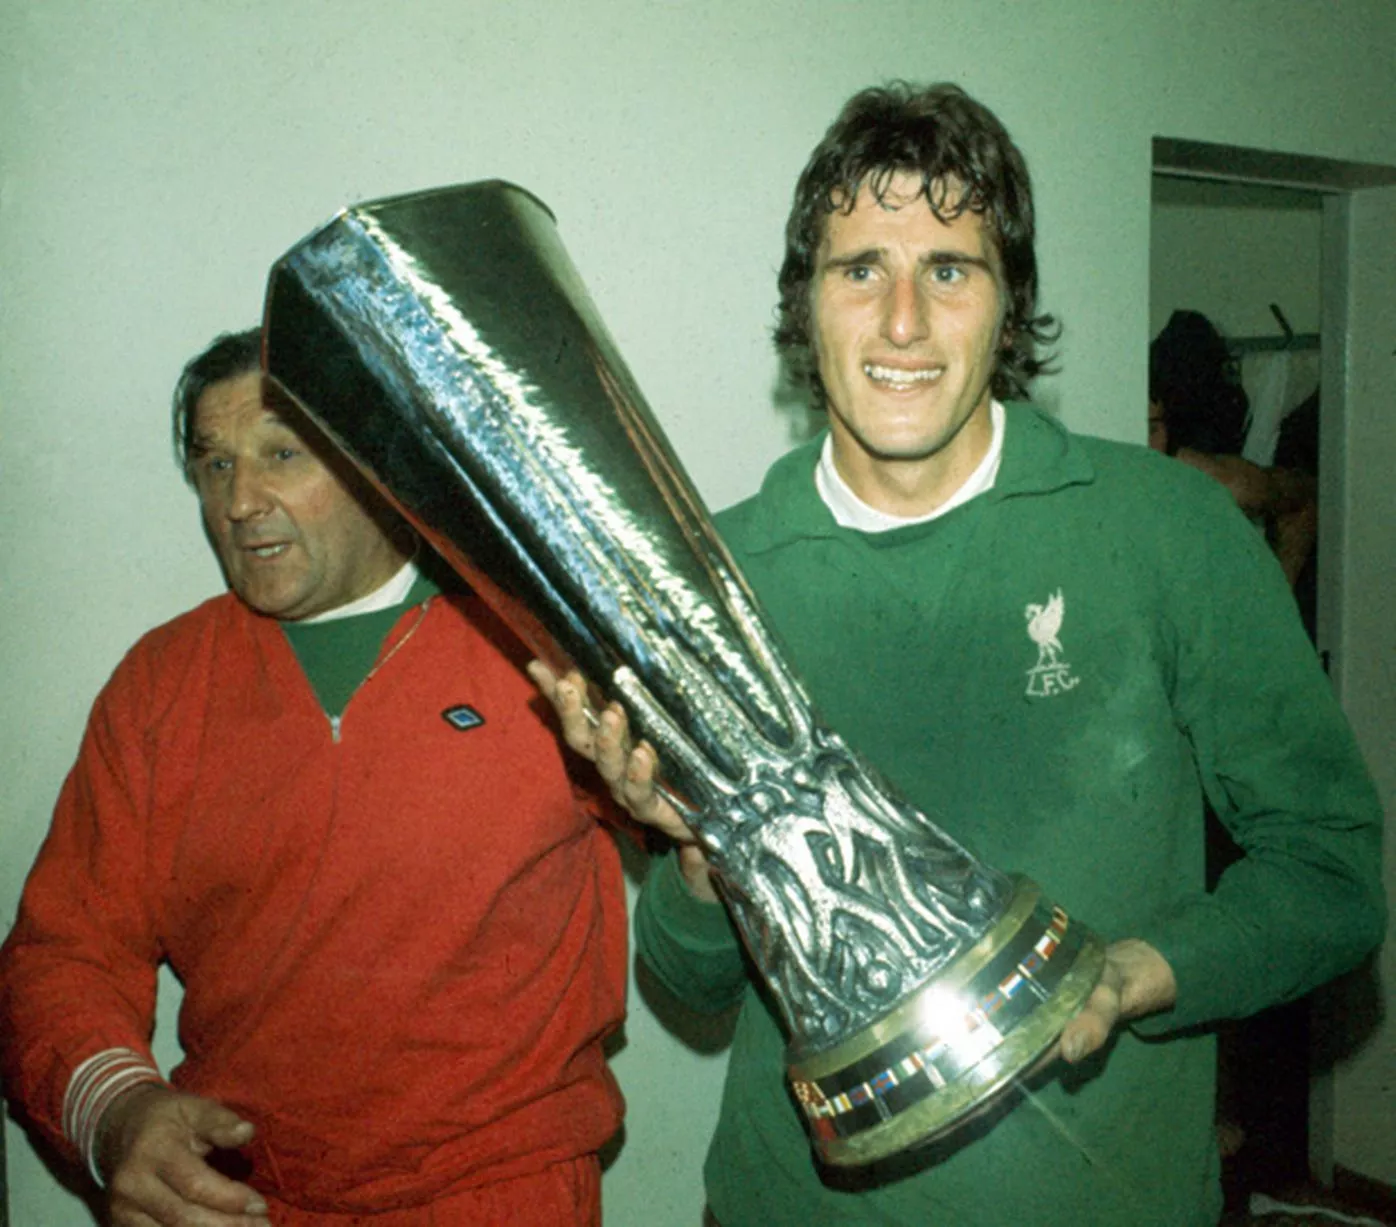 Https://fanpagepress.net/m/R/Ray Clemence Dating 2